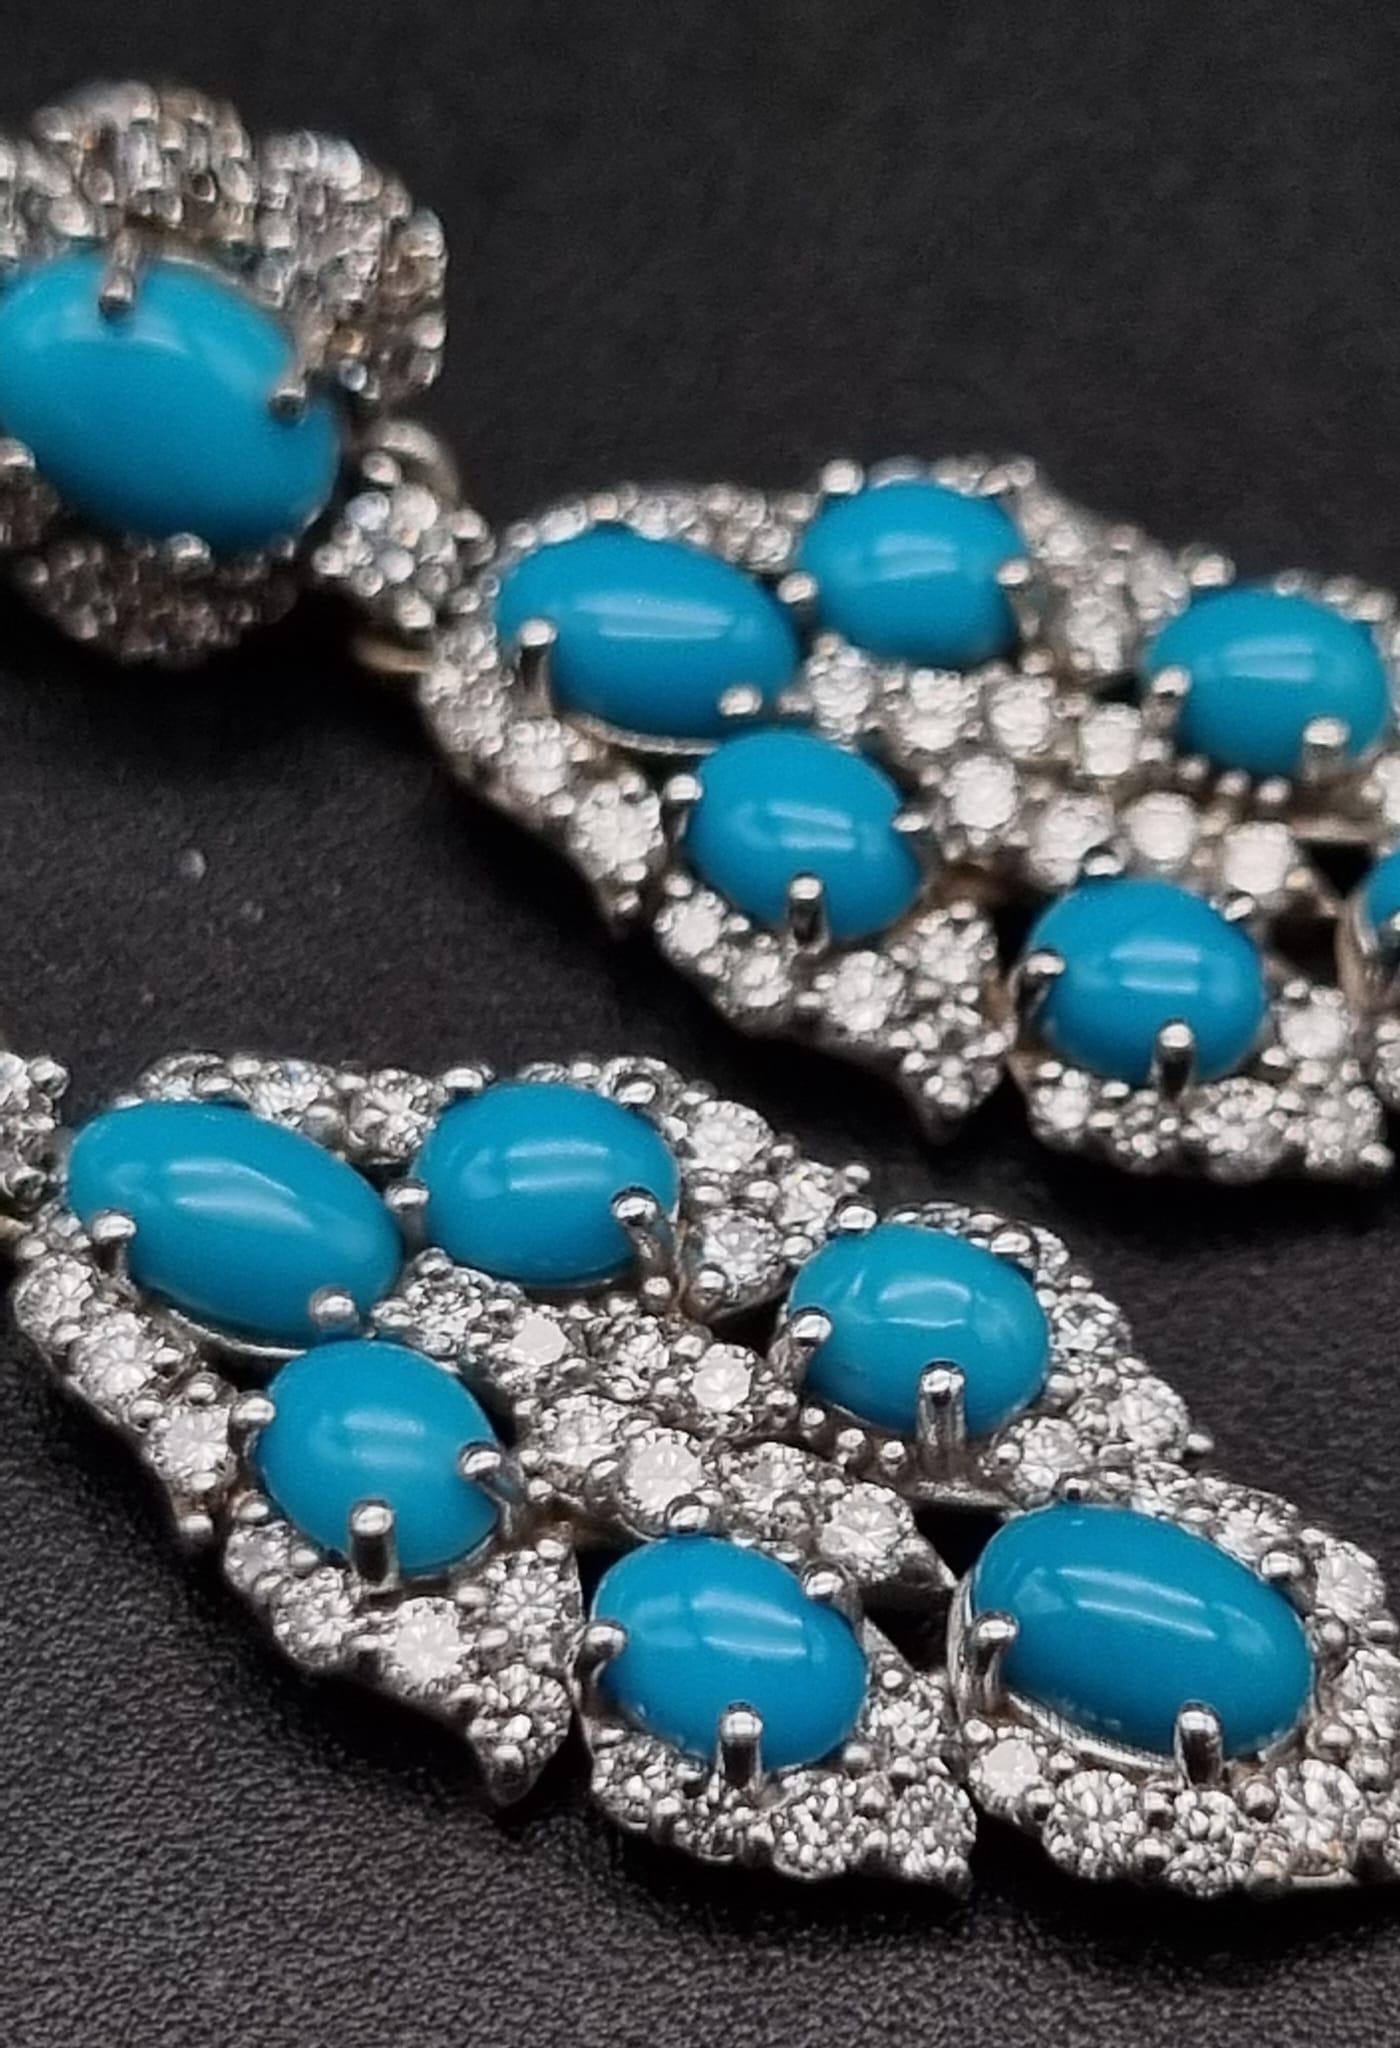 A Pair of Vintage 18K White Gold Diamond and Turquoise Earrings. A turquoise cabochon surrounded - Image 3 of 3